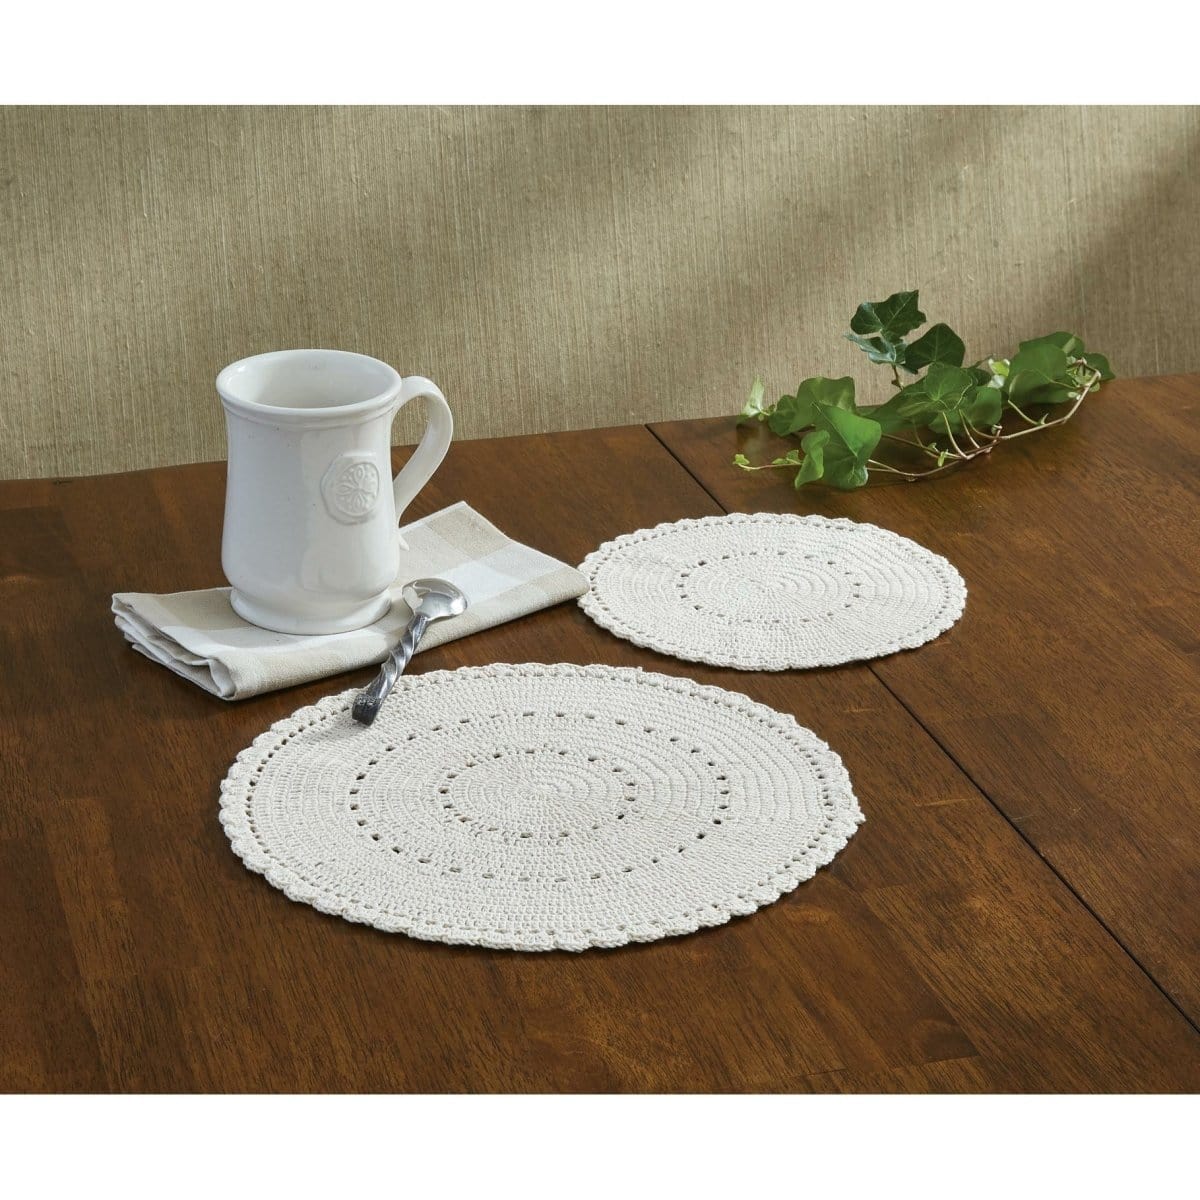 Lace in Cream Crocheted Accent Mat Round Set of 2 - Assorted Sizes-Park Designs-The Village Merchant